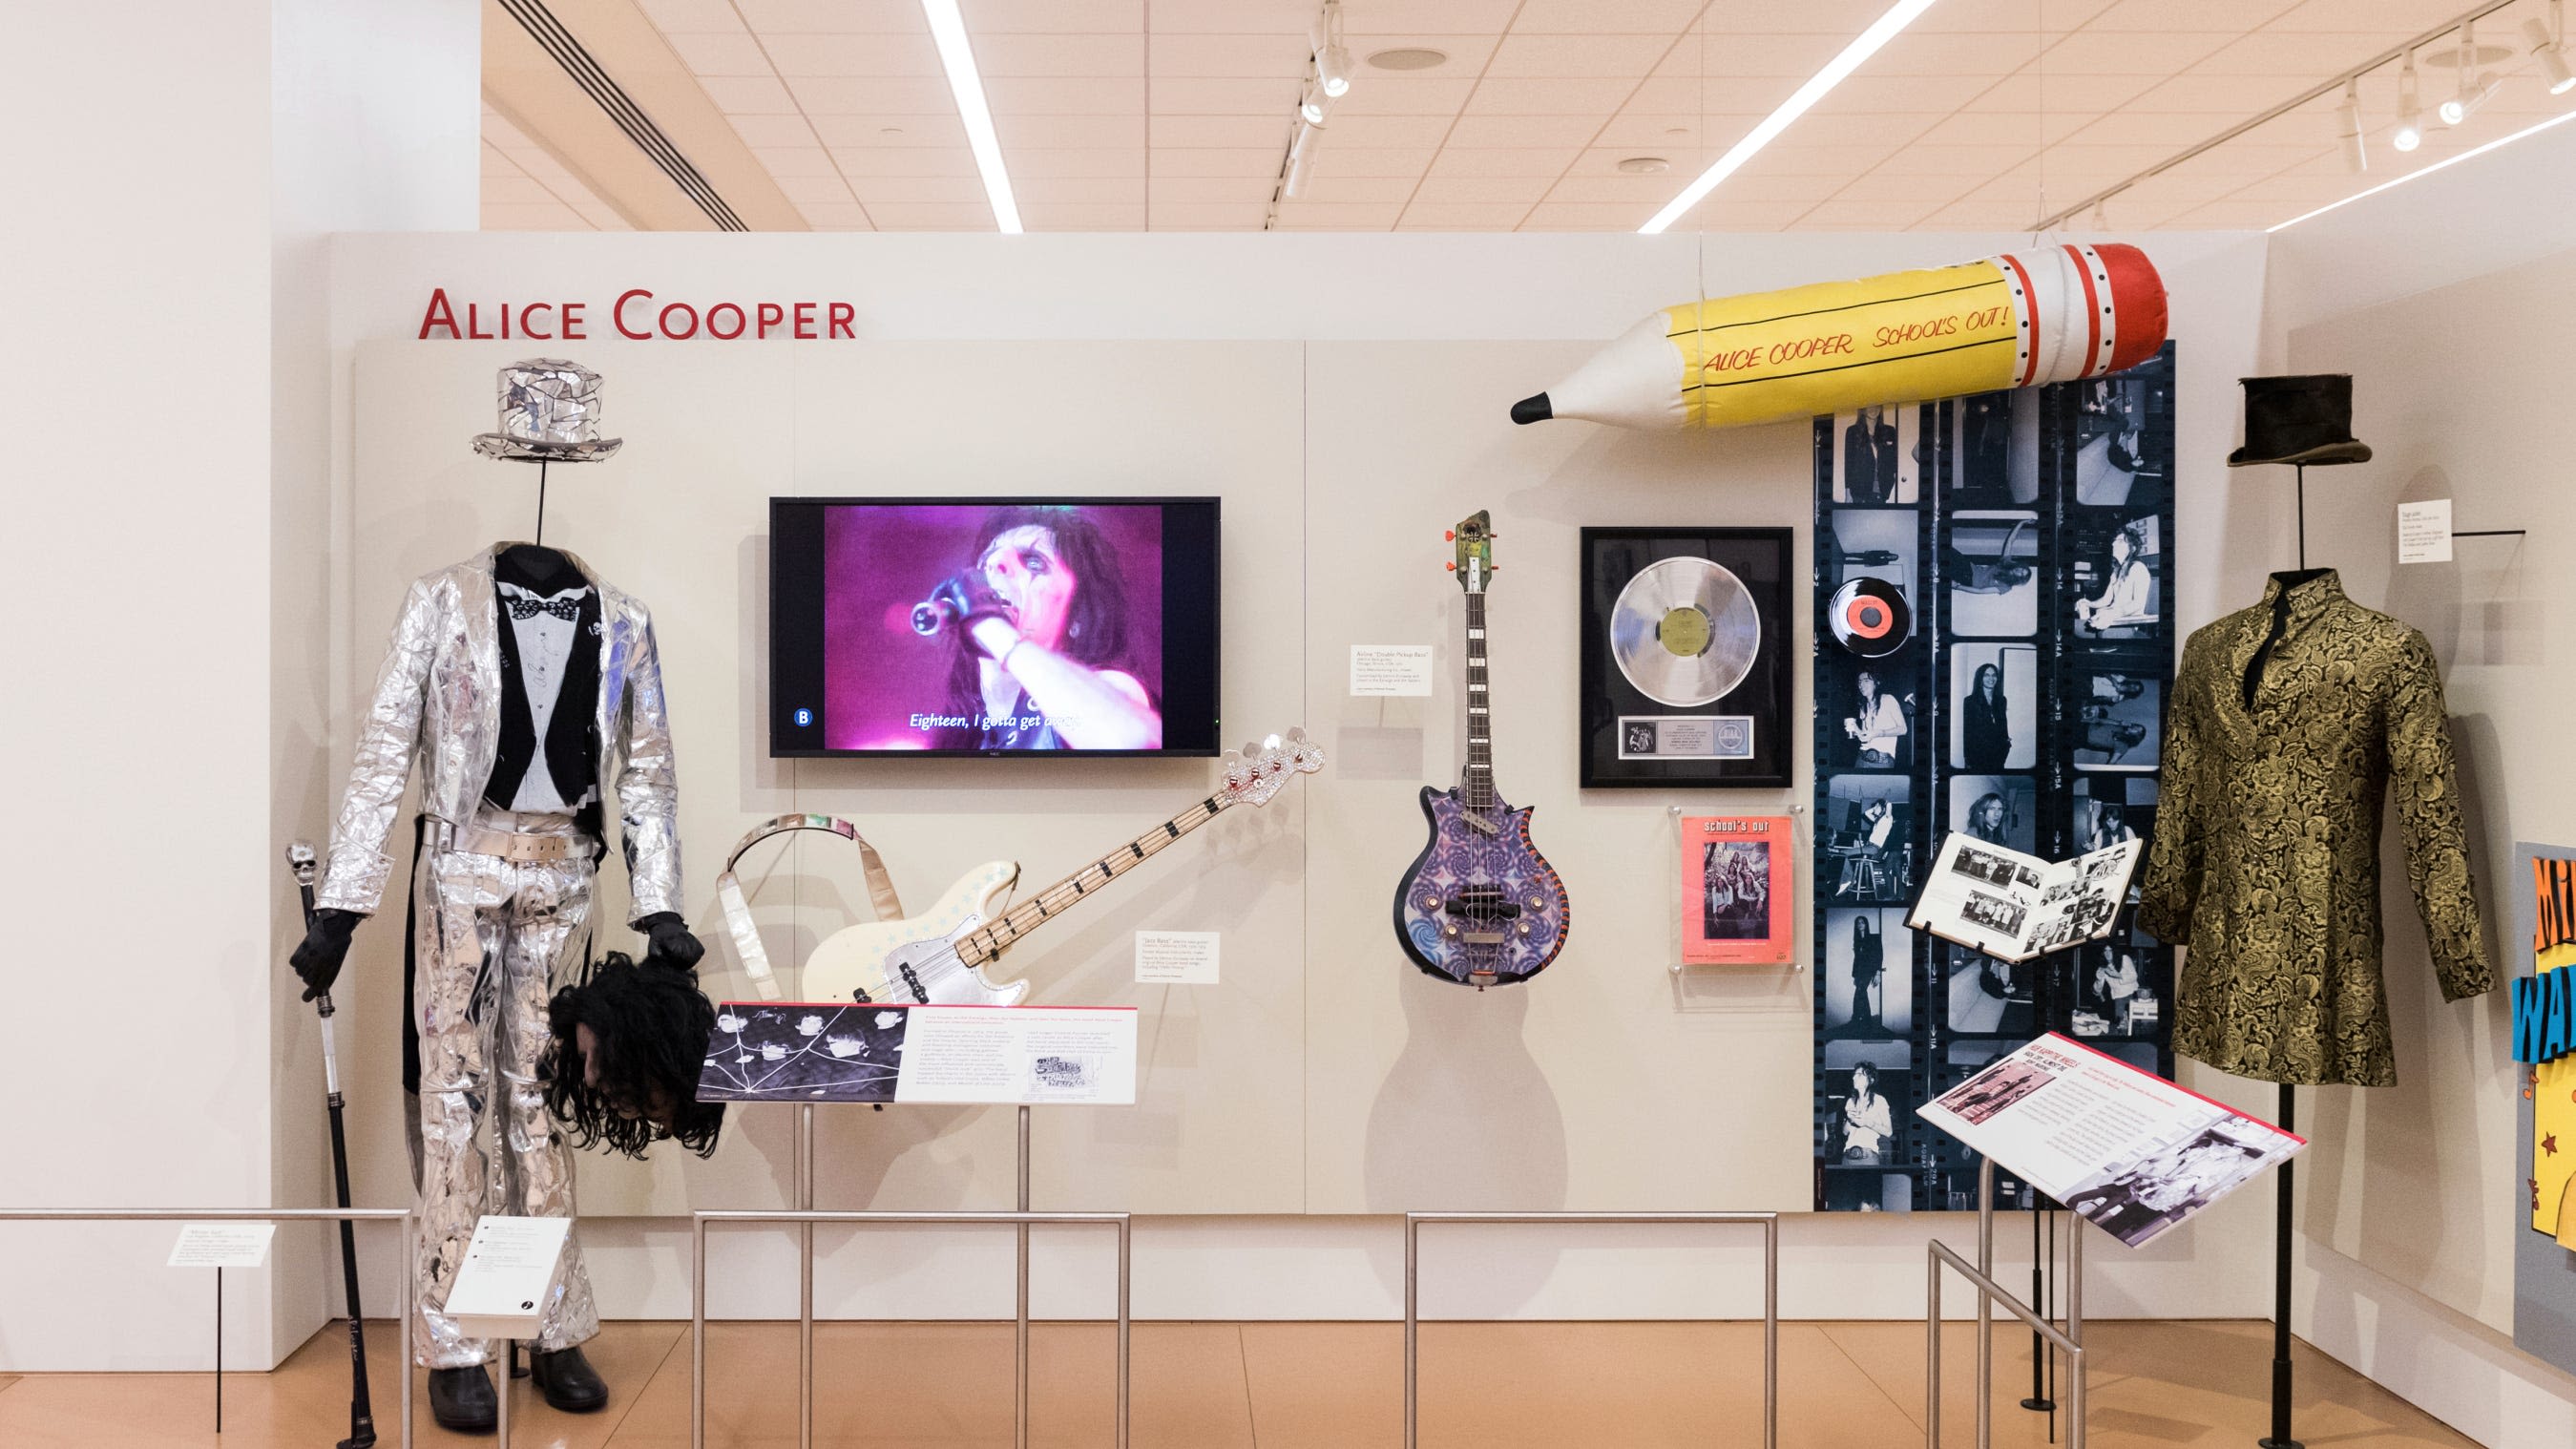 Make an Alice Cooper top hat at Musical Instrument Museum special event honoring the icon